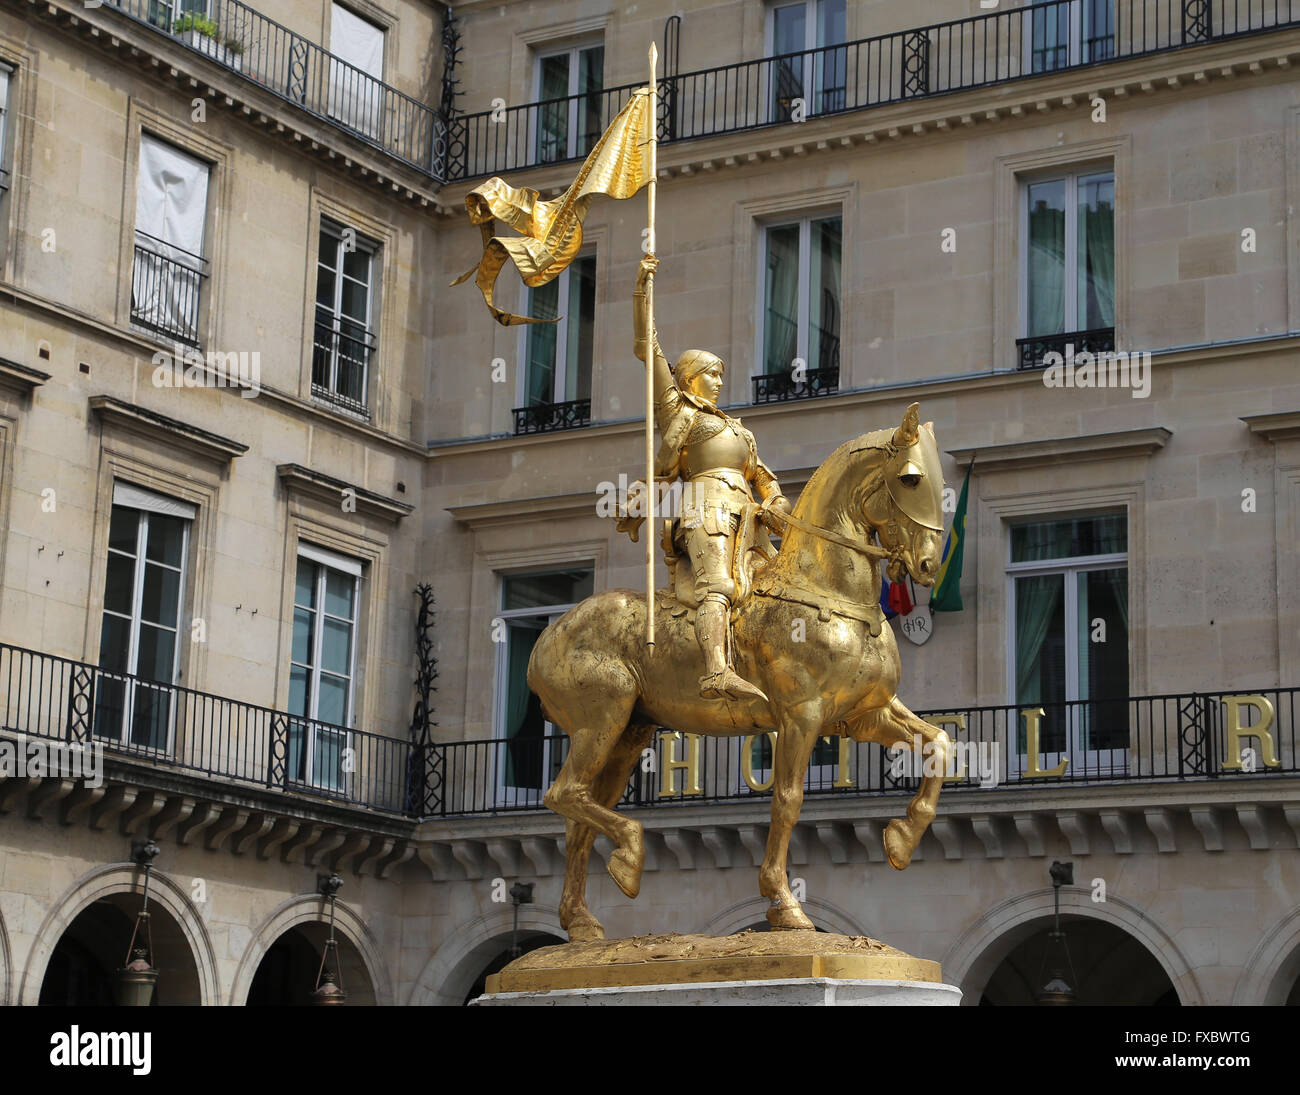 Statue of Joan of Arc (1412-1431). by French sculptor Emmanuel Fremiet (1824-1910). Paris, France. Stock Photo